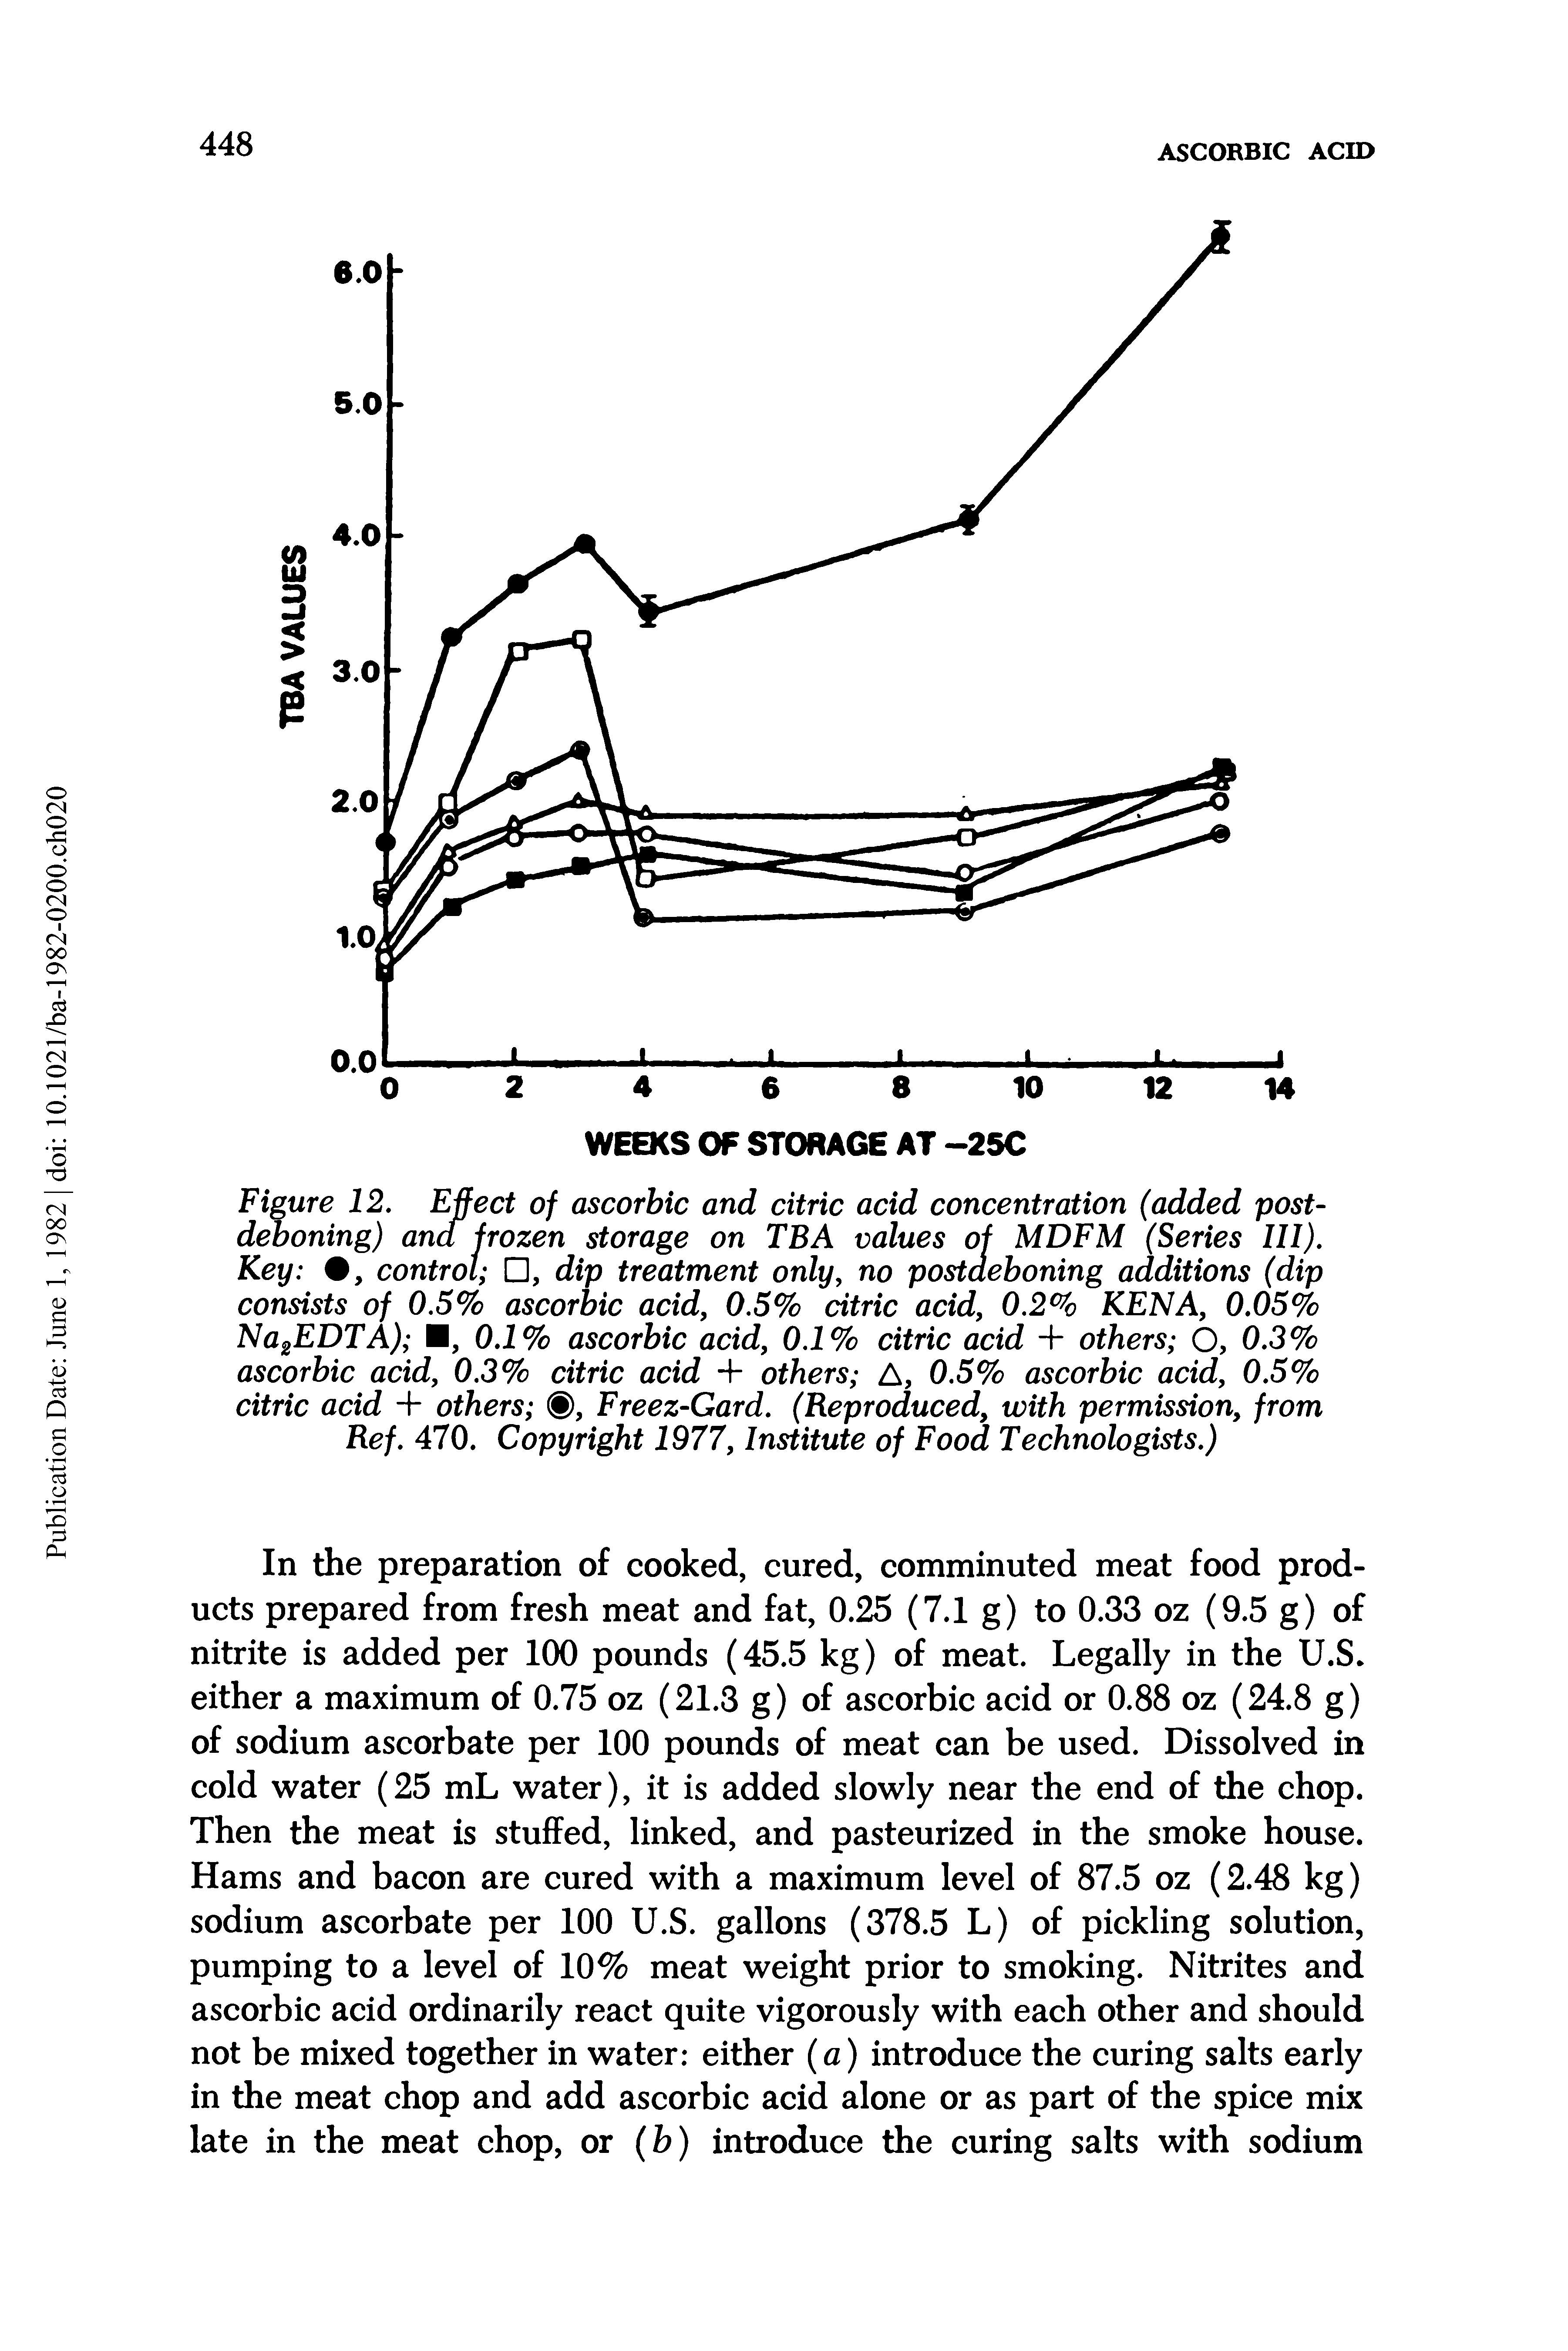 Figure 12. Effect of ascorbic and citric acid concentration (added post-droning) and frozen storage on TEA values of MDFM (Series III). Key , control , dip treatment only, no postaeboning additions (dip consists of 0.5% ascorbic acid, 0.5% citric acid, 0.2% KENA, 0.05% Na2EDTA) M, 0.1% ascorbic acid, 0.1% citric acid + others O, 0.3% ascorbic acid, 0.3% citric acid + others A, 0.5% ascorbic acid, 0.5% citric acid + others , Freez-Gard. (Reproduced, with permission, from Ref. 470. Copyright 1977, Institute of Food Technologists.)...